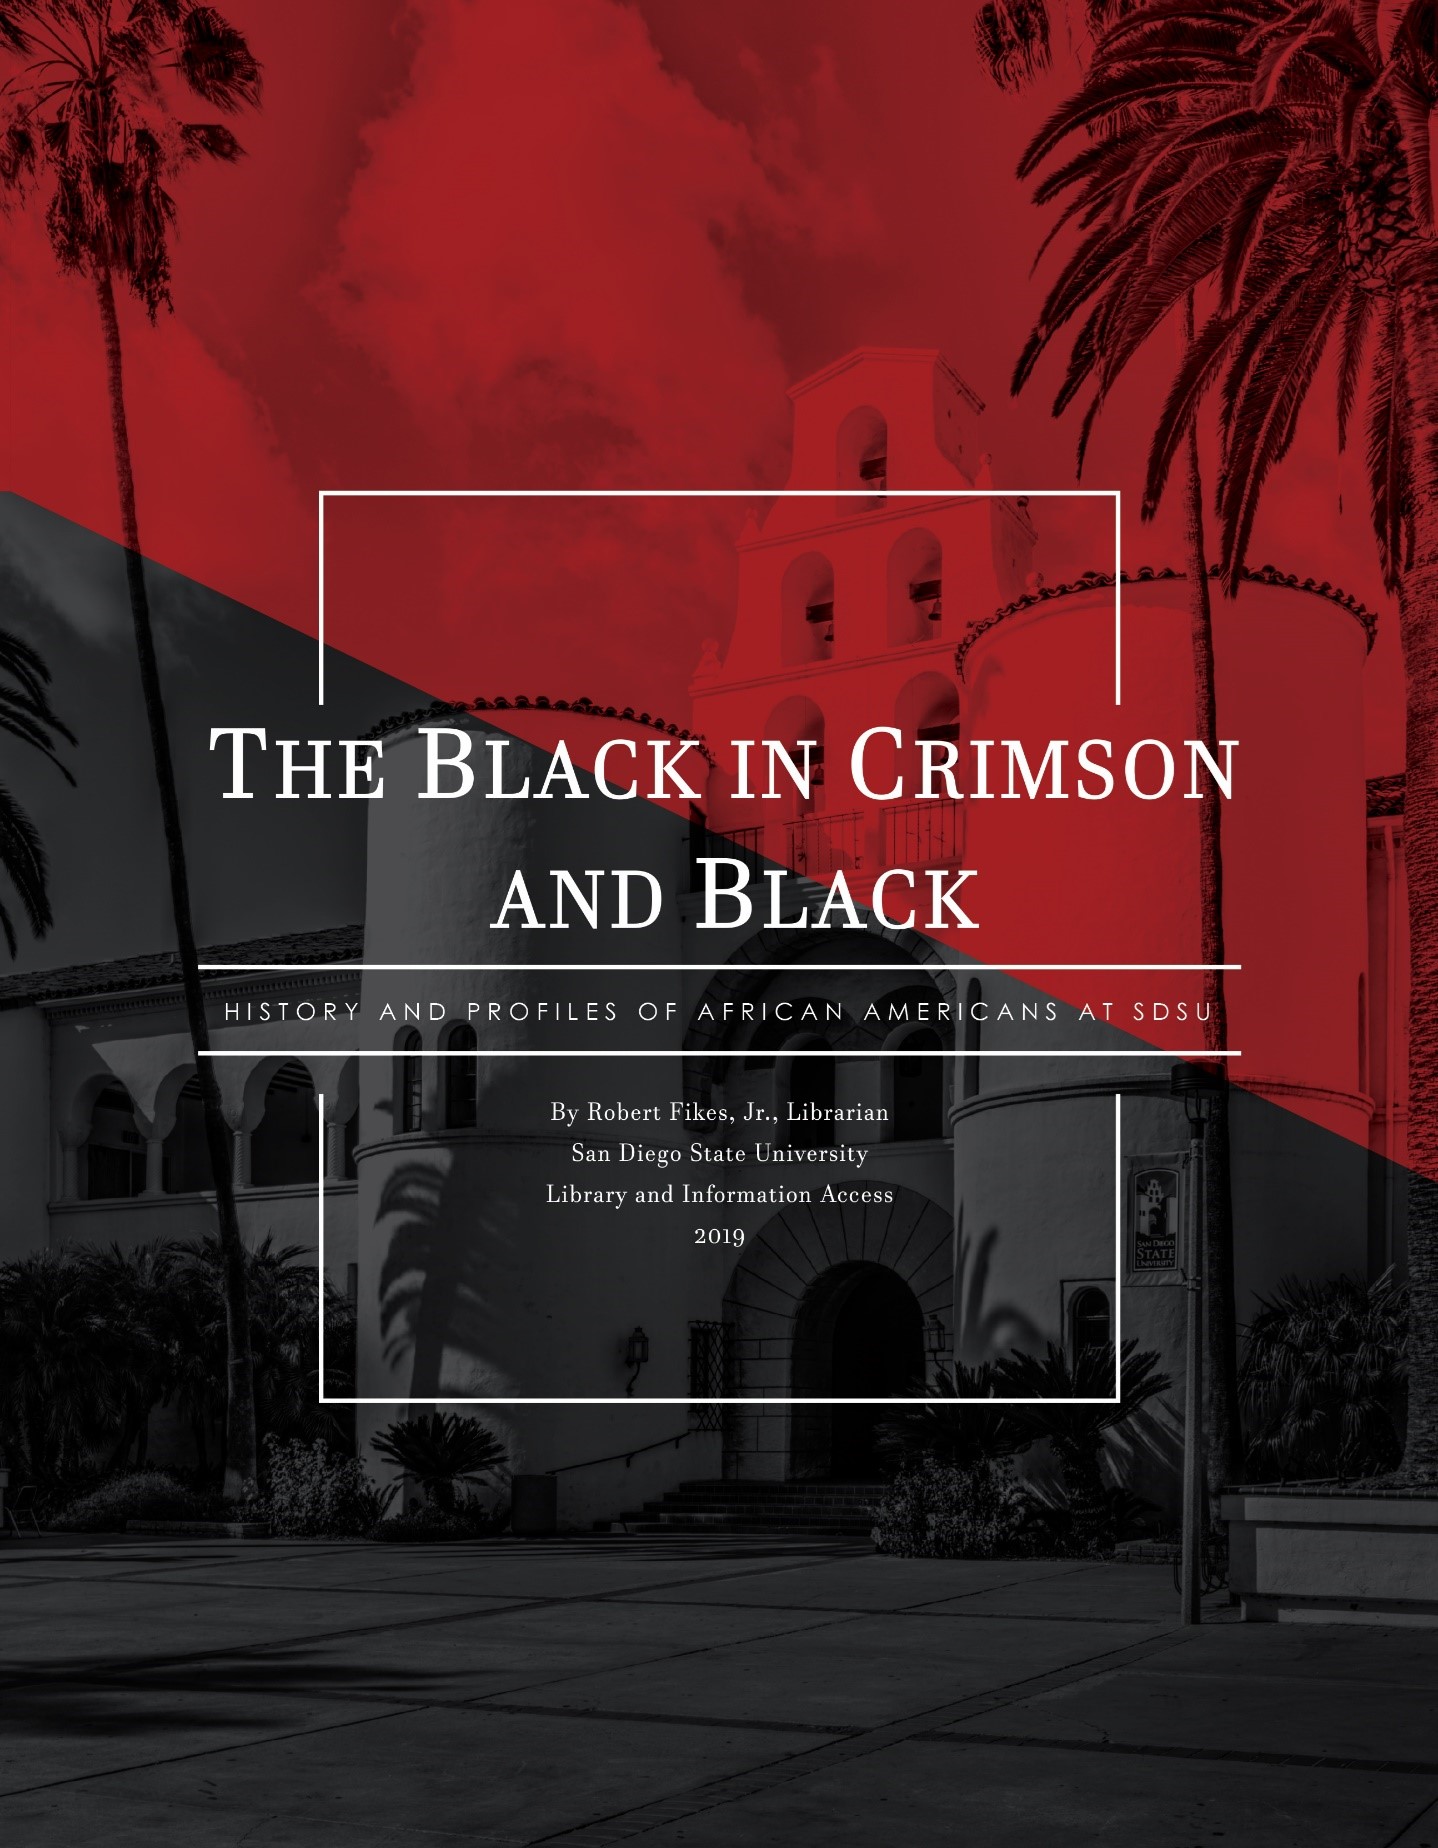 The Black in Crimson and Black: History and Profiles of African Americans at SDSU